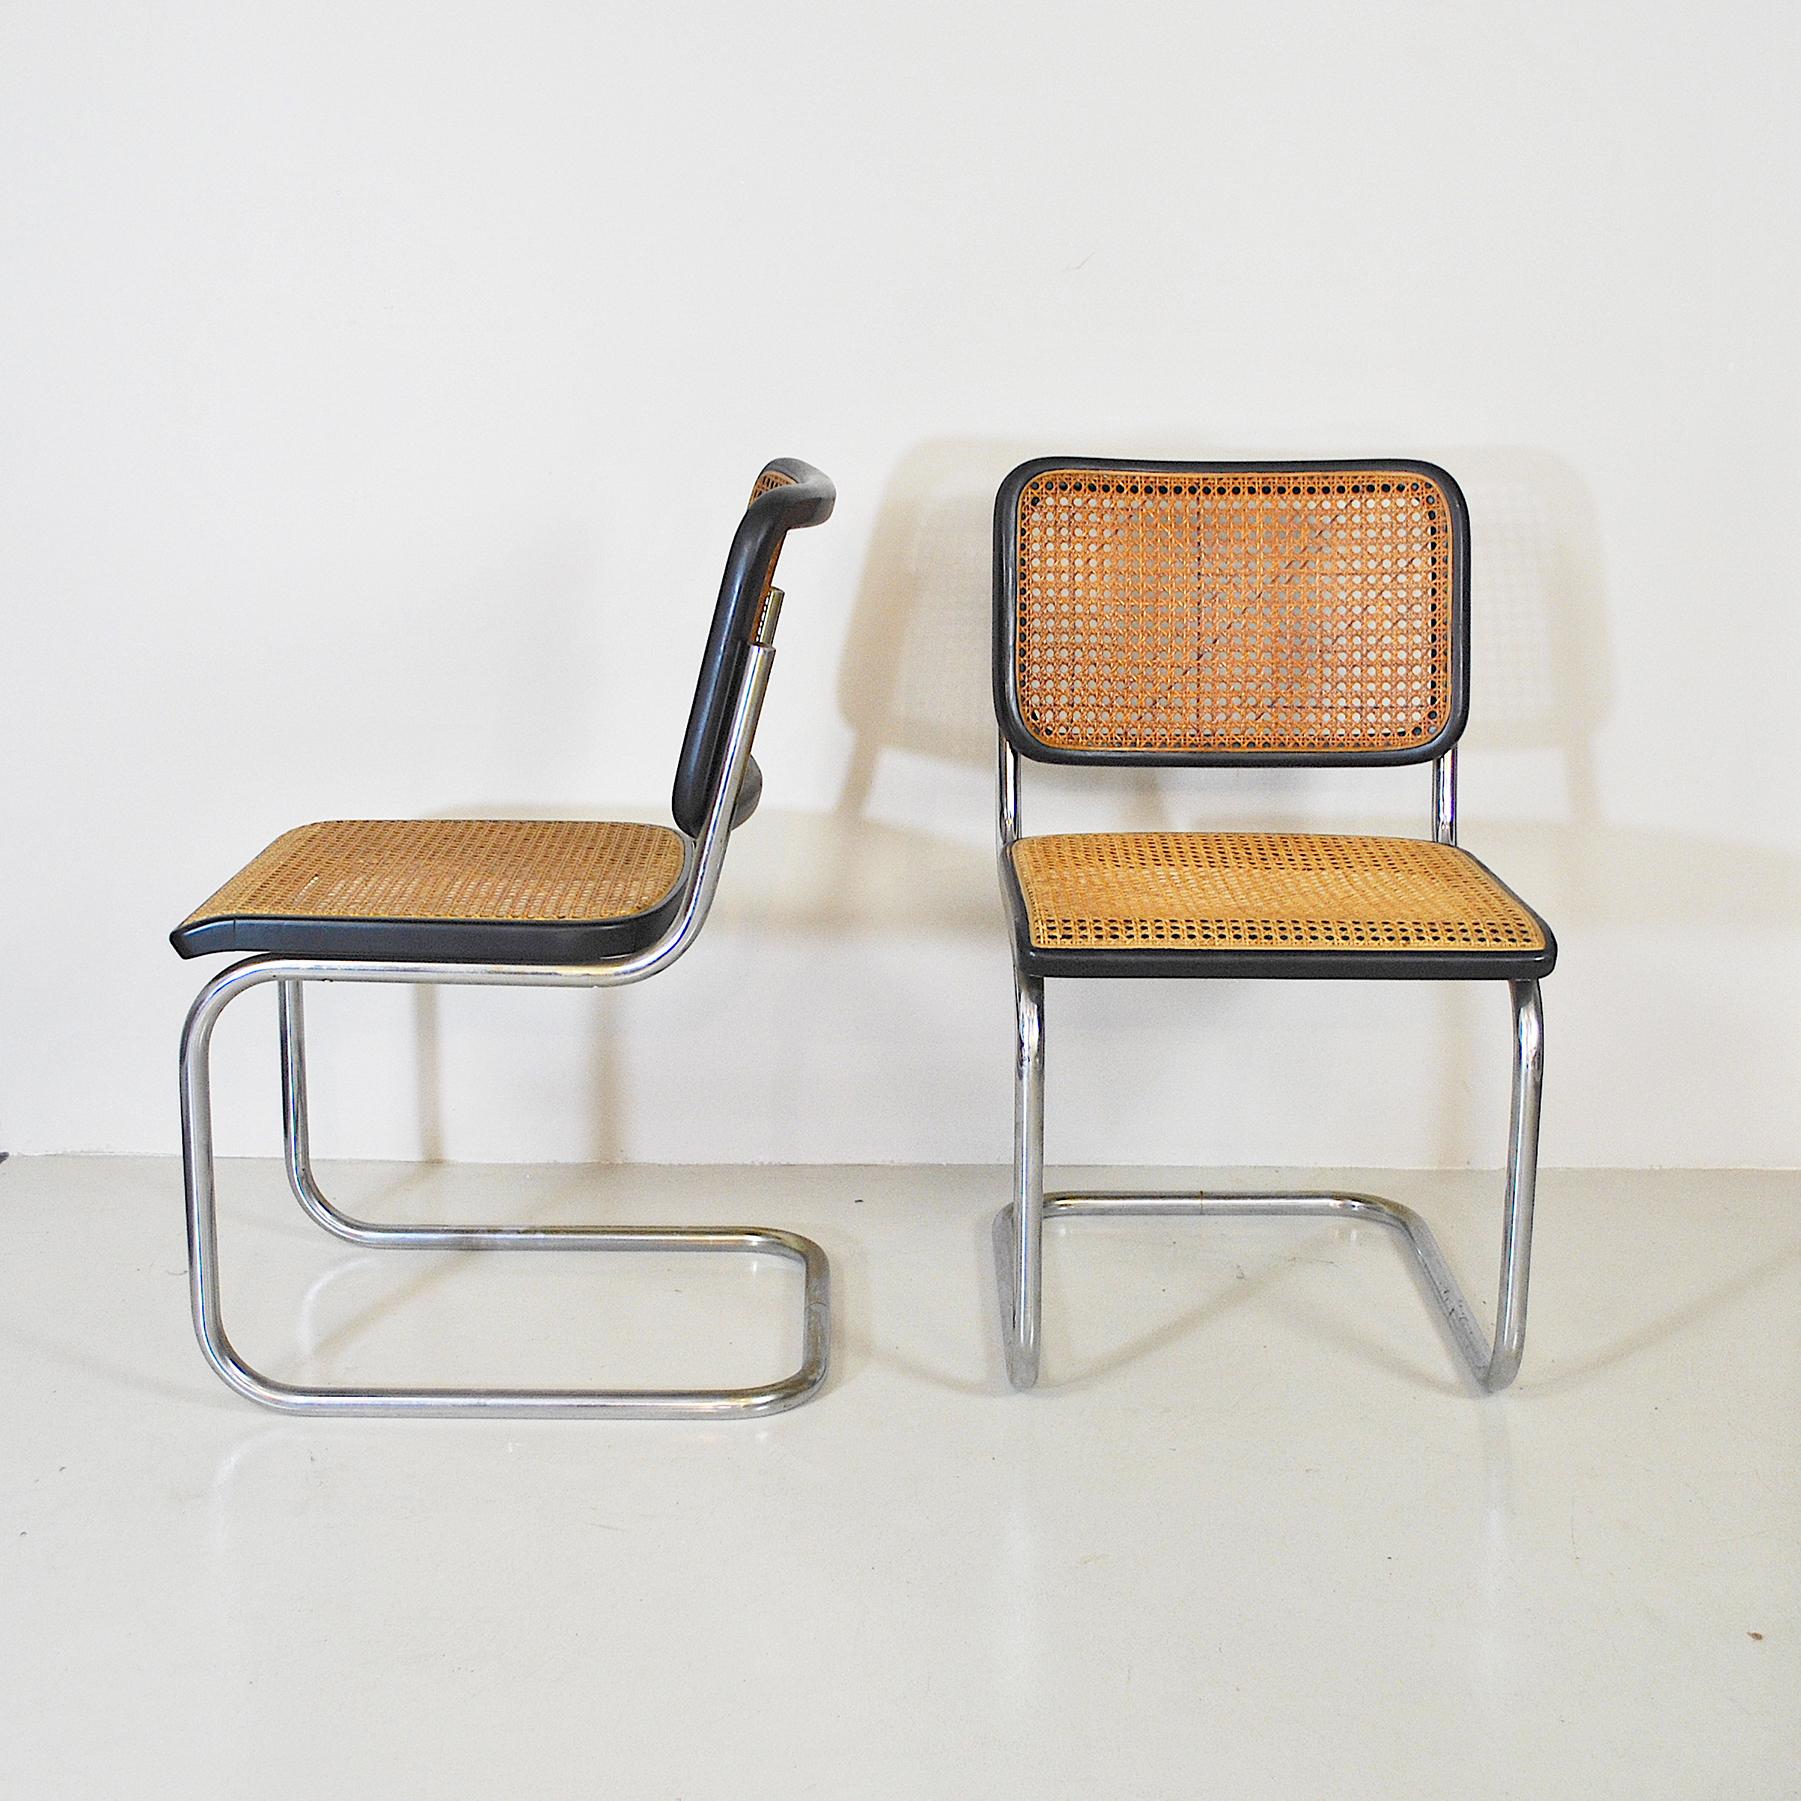 Late 20th Century Marce Breur Midcentury Chairs Model Cesca by Thonet, 1970s